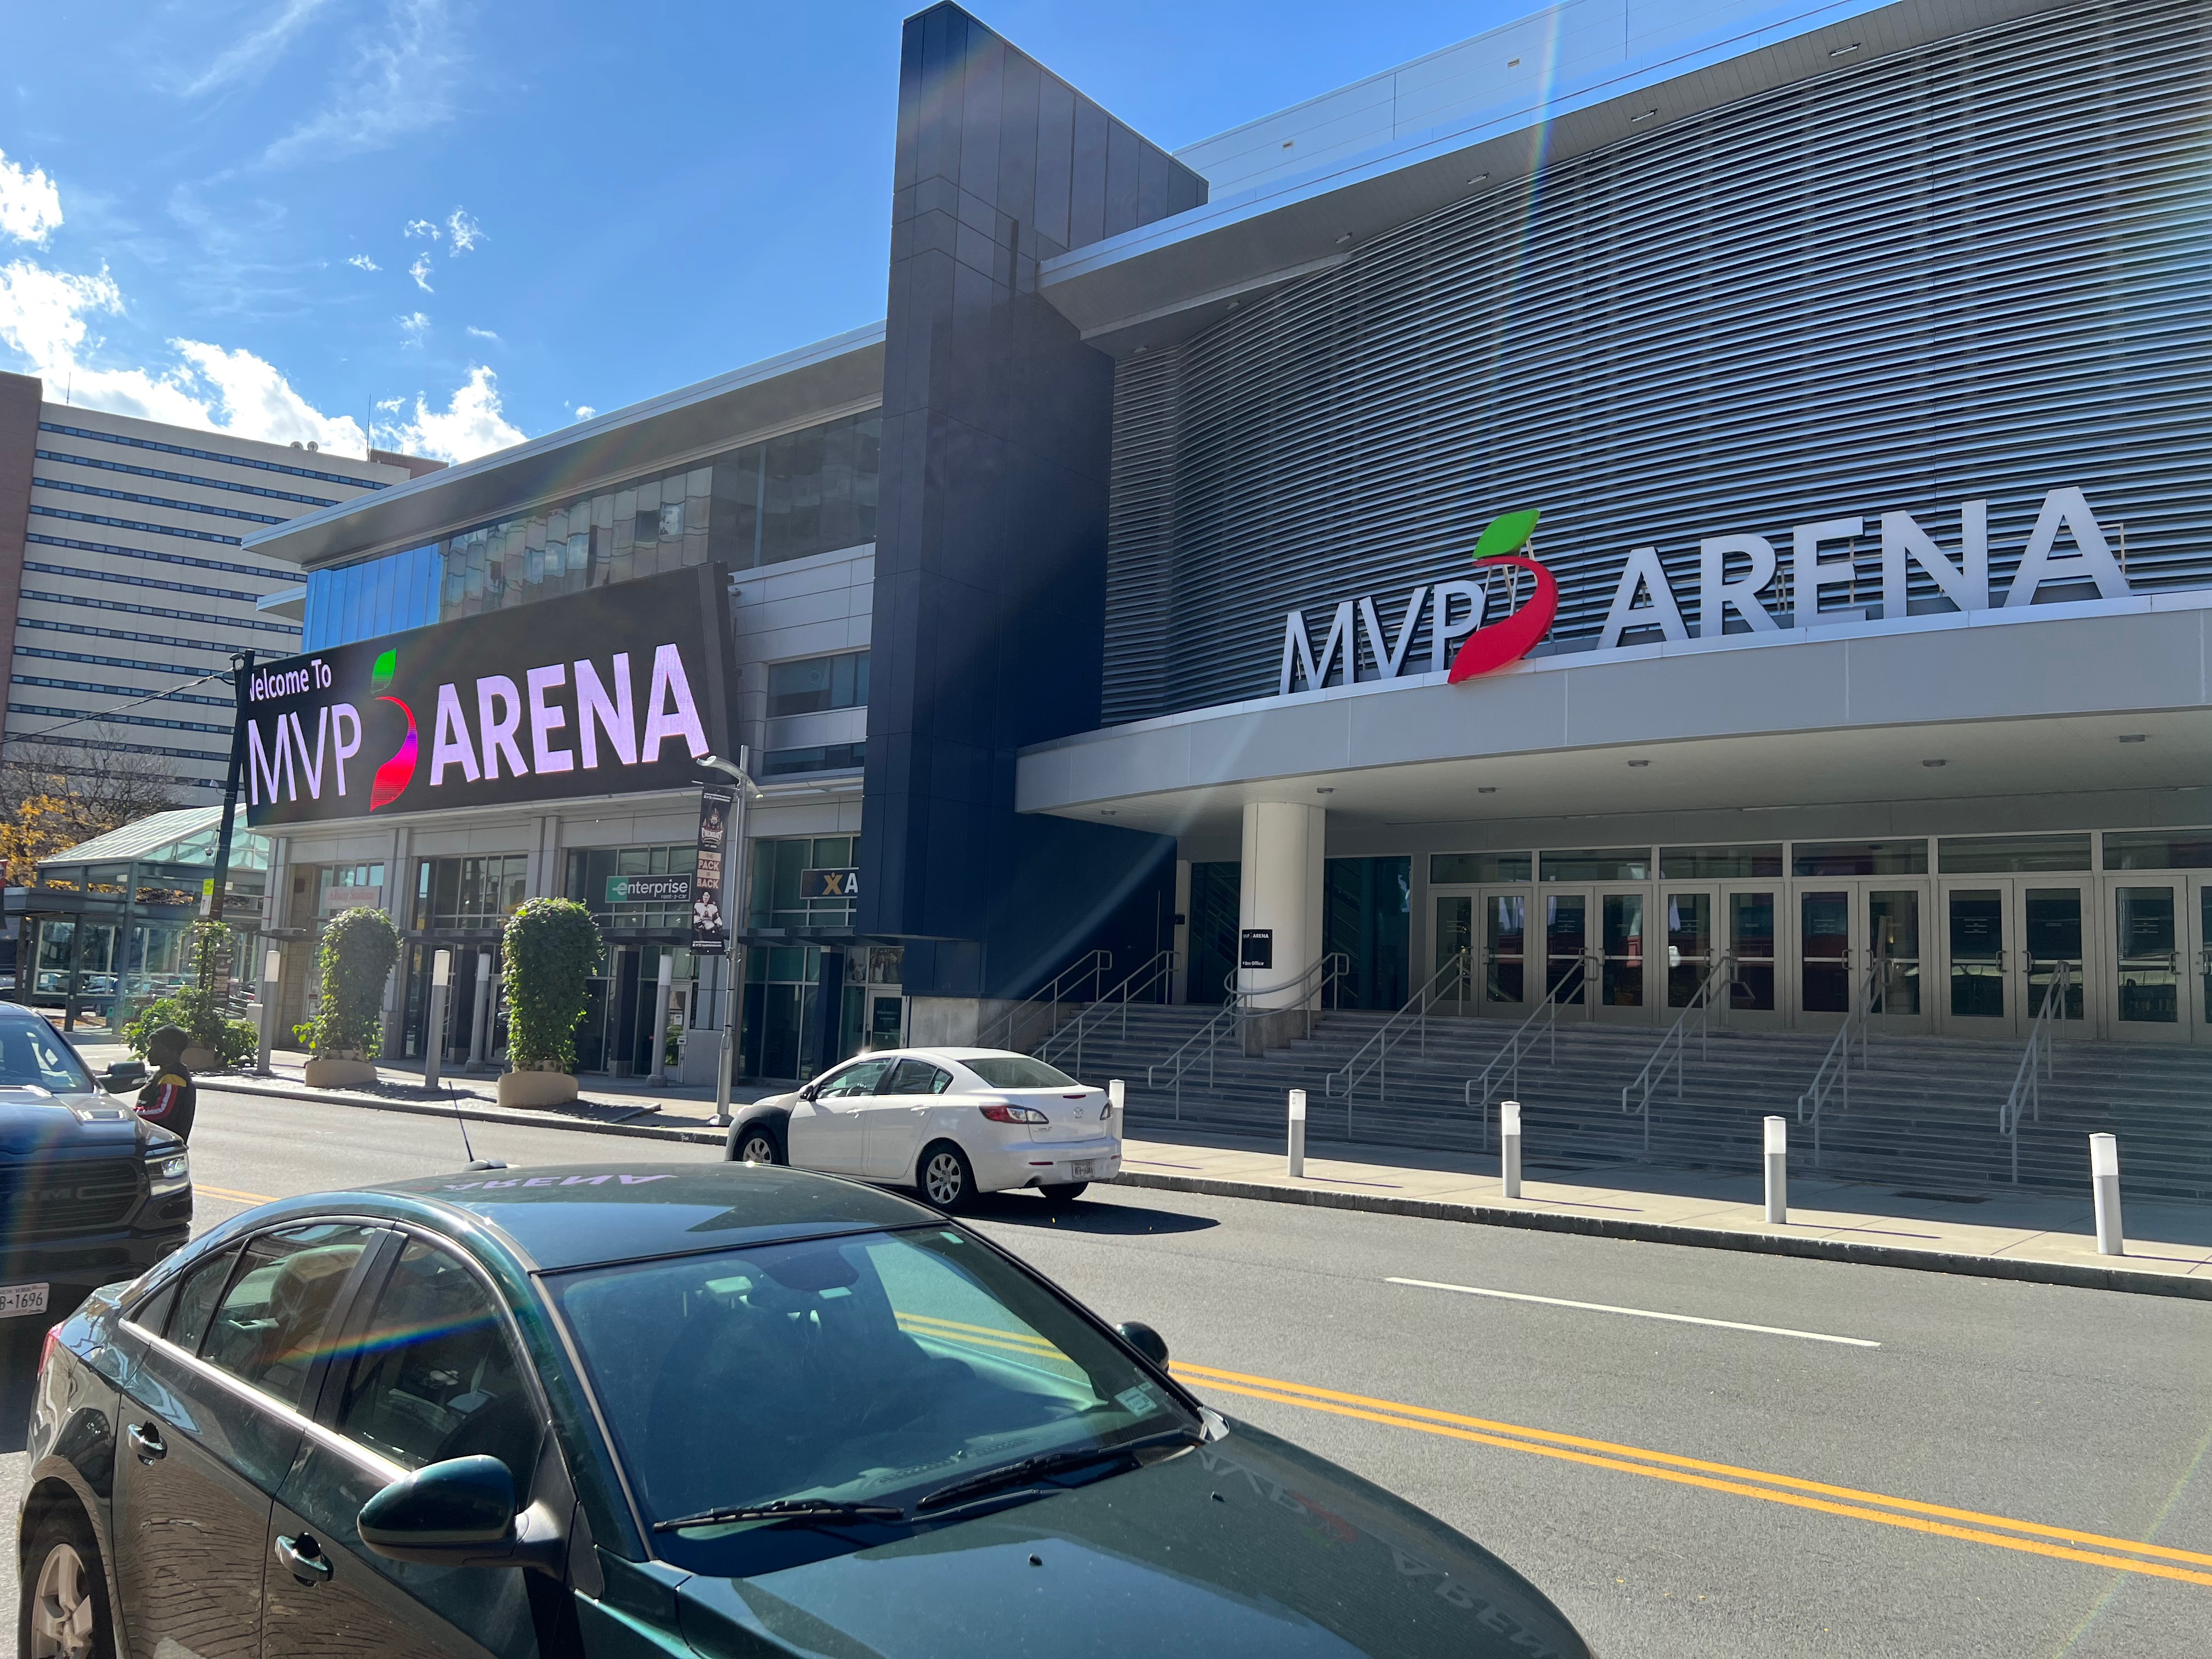 MVP Arena during the daytime in Albany, NY